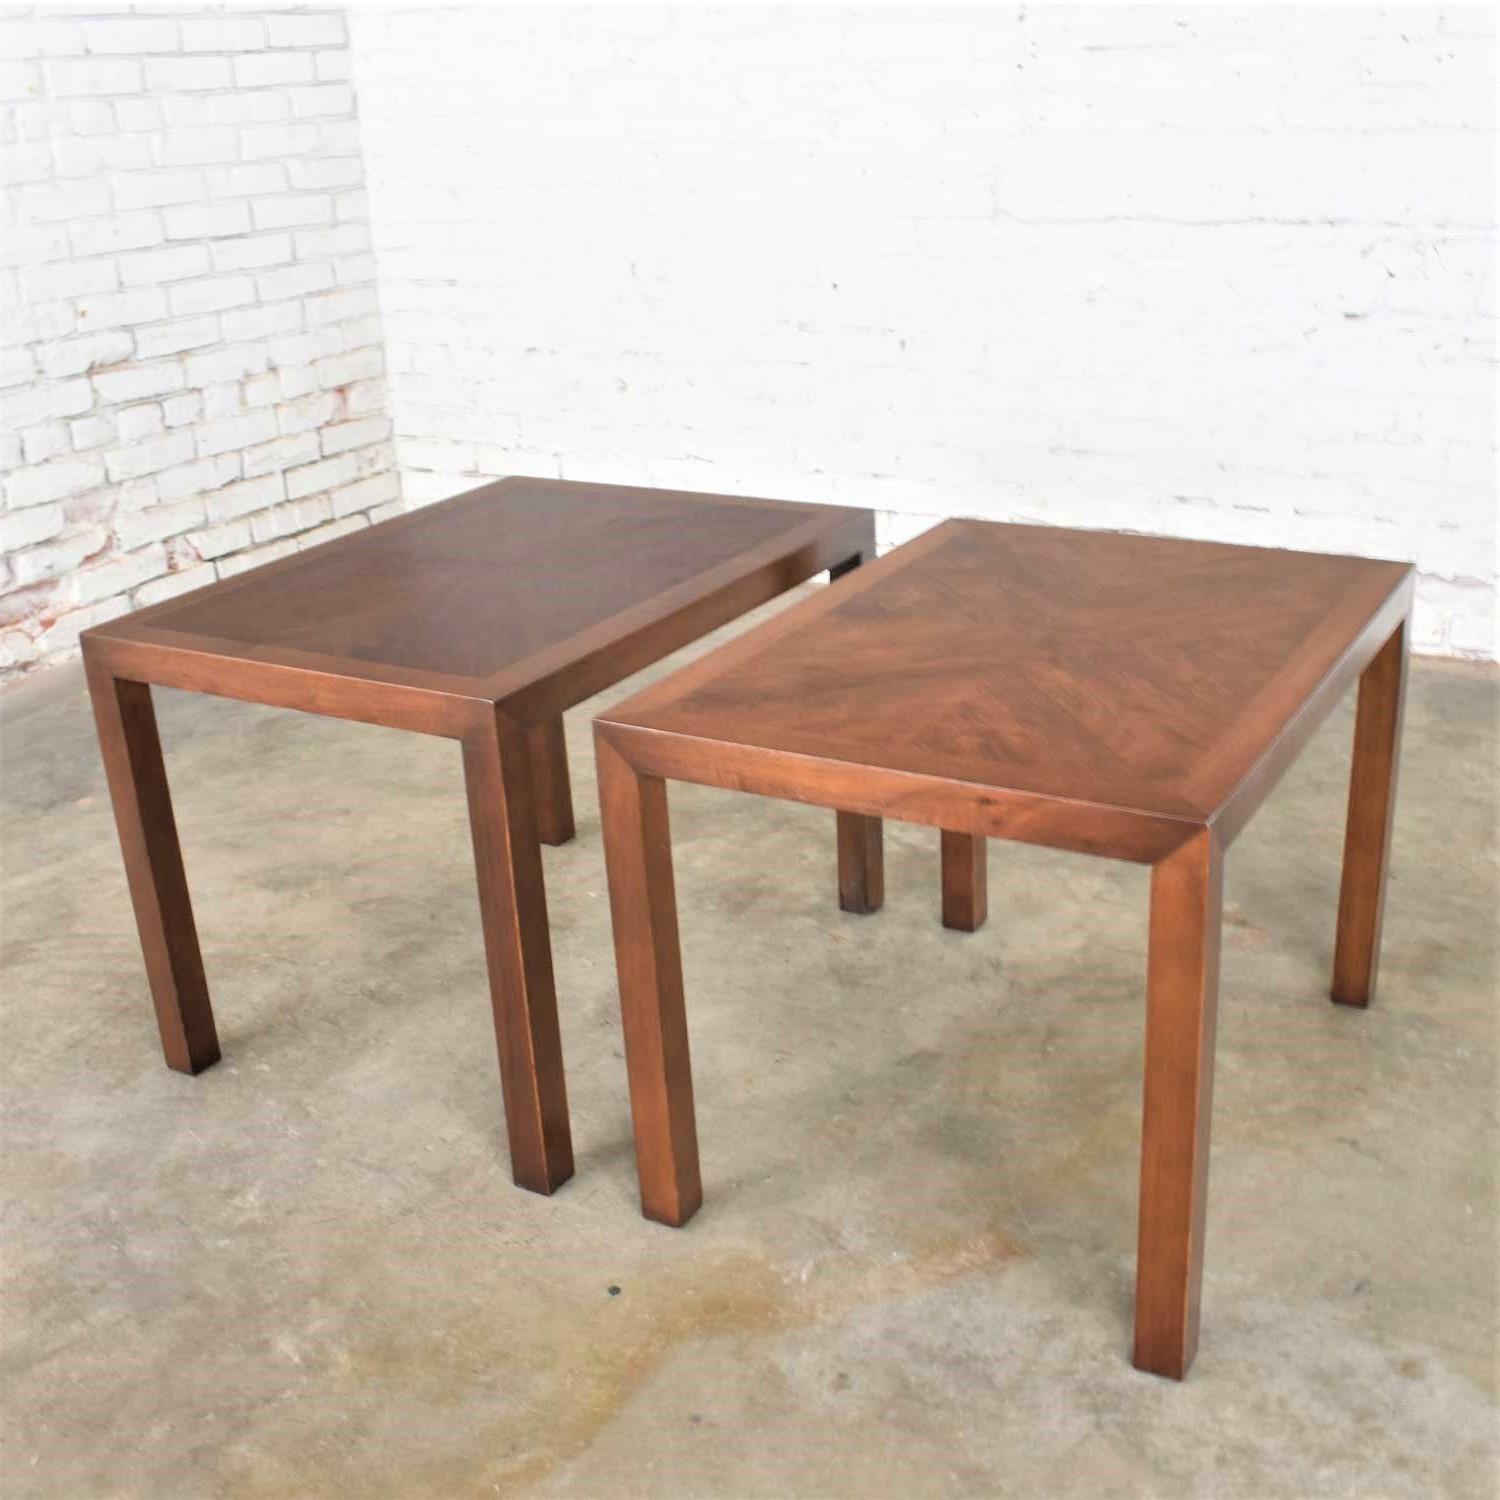 Handsome pair of vintage modern parsons style rectangular end tables or side tables by Lane of Alta Vista in walnut with walnut diagonal inlay. They are in wonderful ready to use condition. The tops have been refinished and restored to their